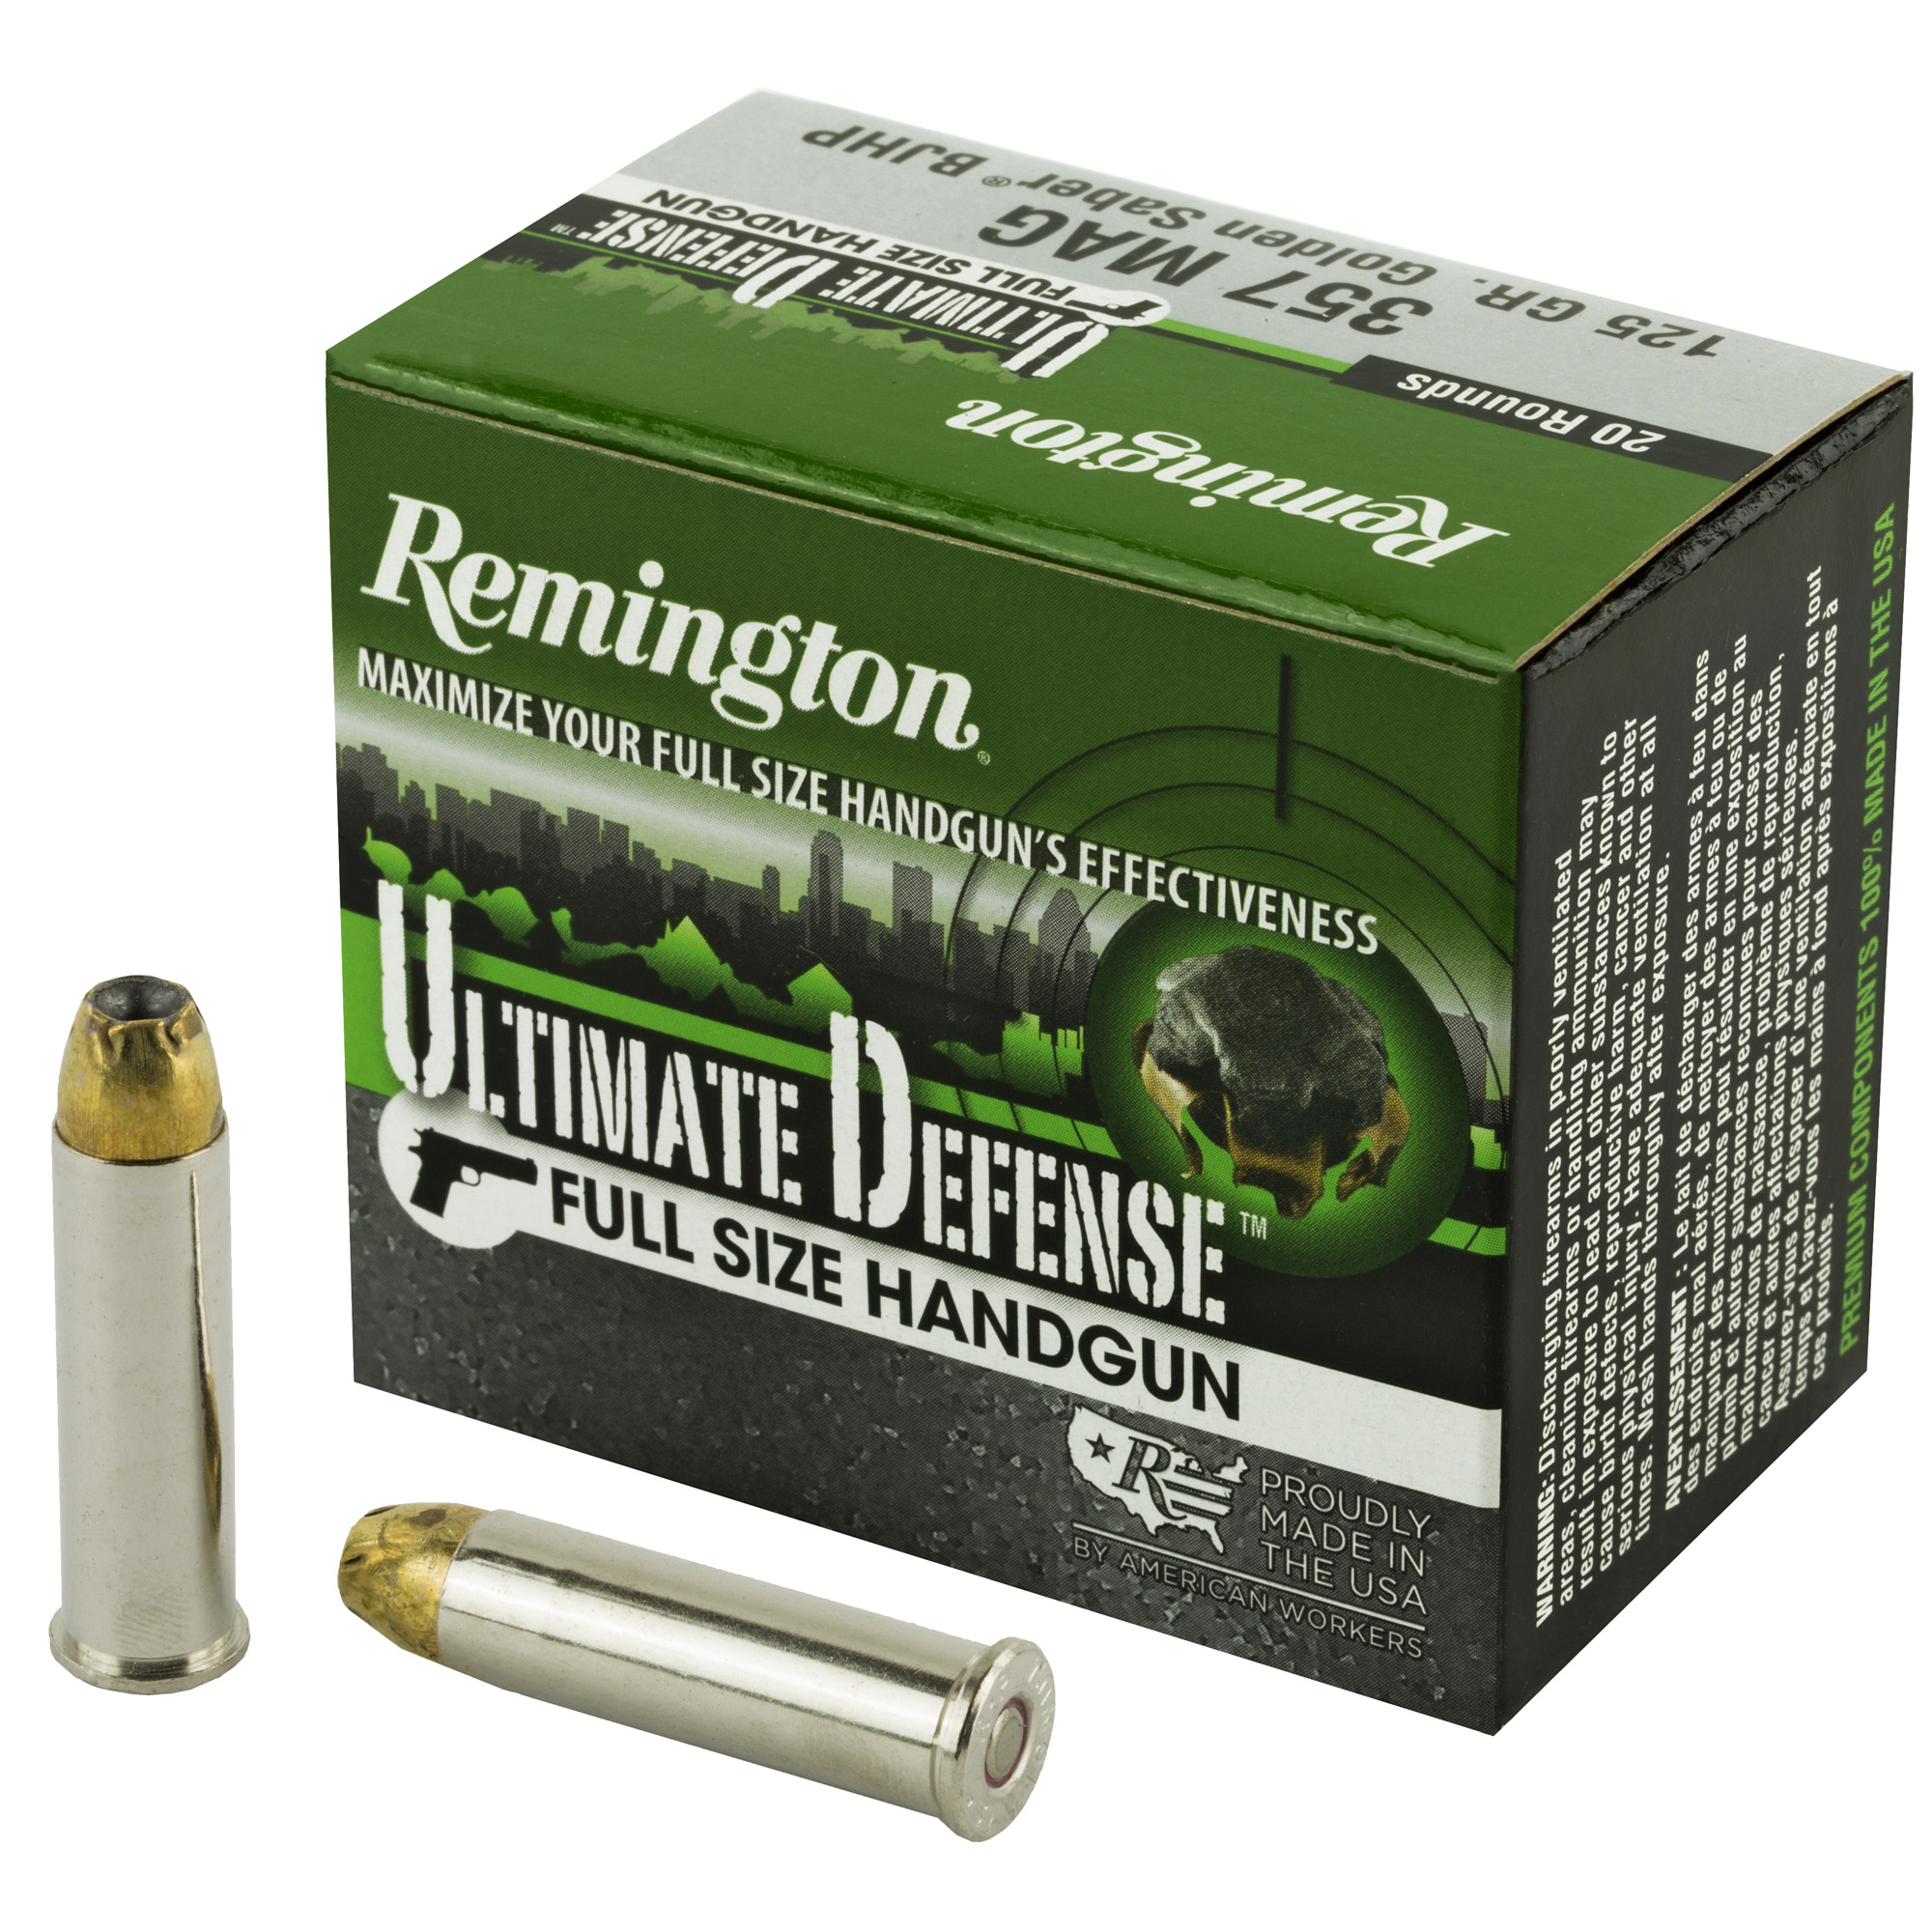 Remington, Ultimate Defense, 357 Magnum, 125 Grain, Brass Jacketed Hollow Point, 20 Round Box